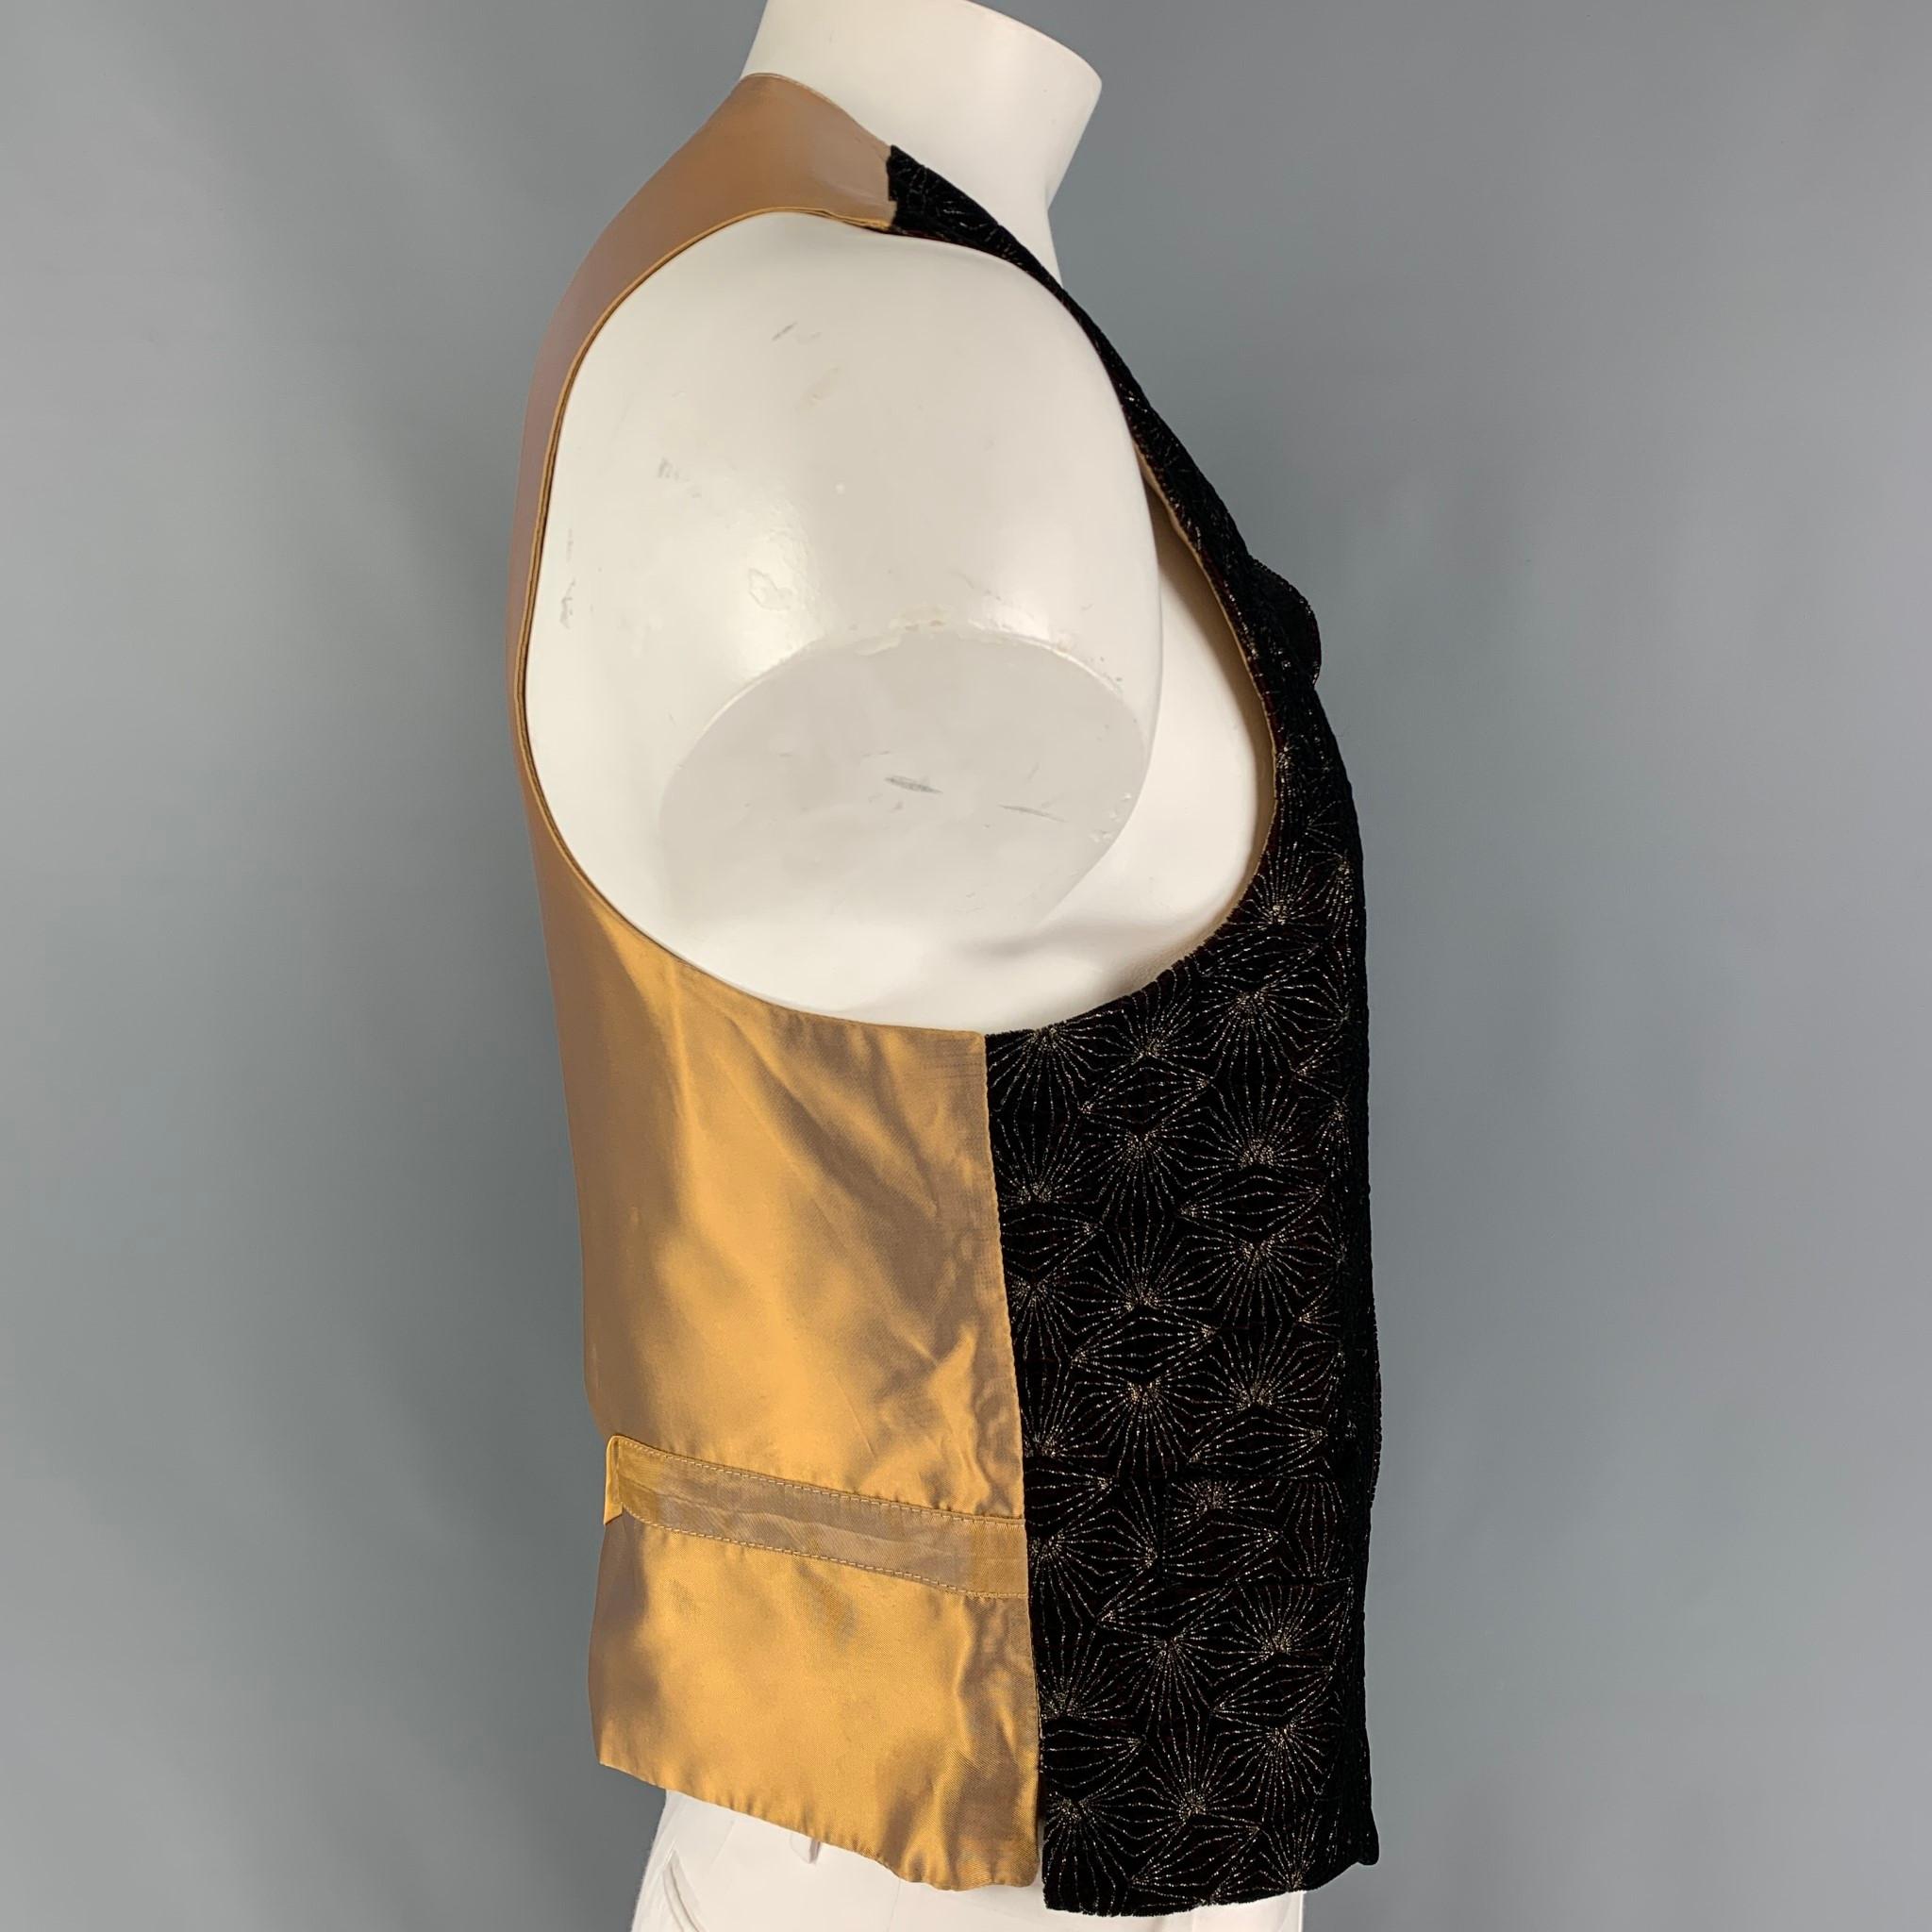 FAVOURBROOK vest comes in a burgundy & gold velvet featuring a back belt, slit pockets, and a gold tone buttoned closure. Made in England. 

Very Good Pre-Owned Condition.
Marked: 44

Measurements:

Shoulder: 15.5 in.
Chest: 44 in.
Length: 22.5 in. 